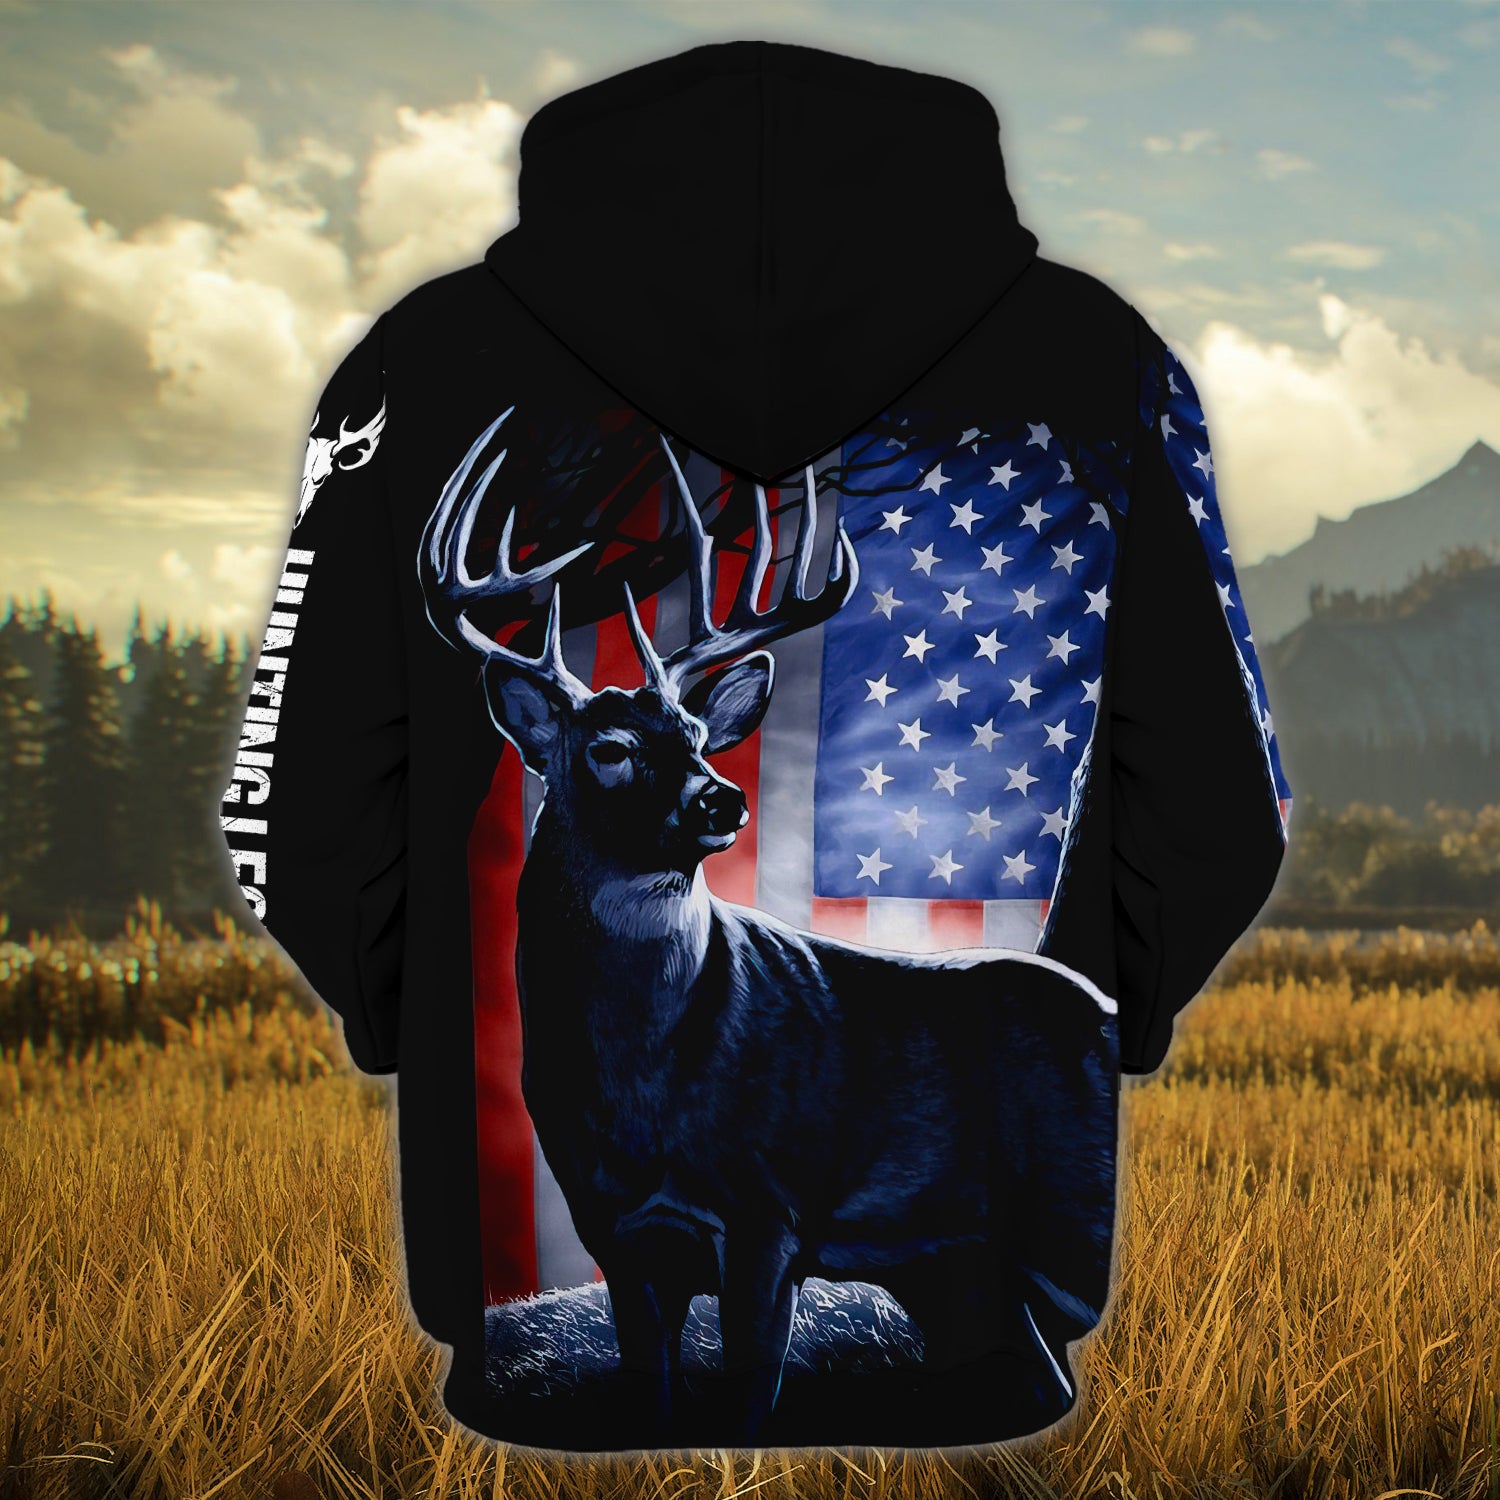 Hunting Legend - Personalized Name 3D Zipper Hoodie 01 - RINC98